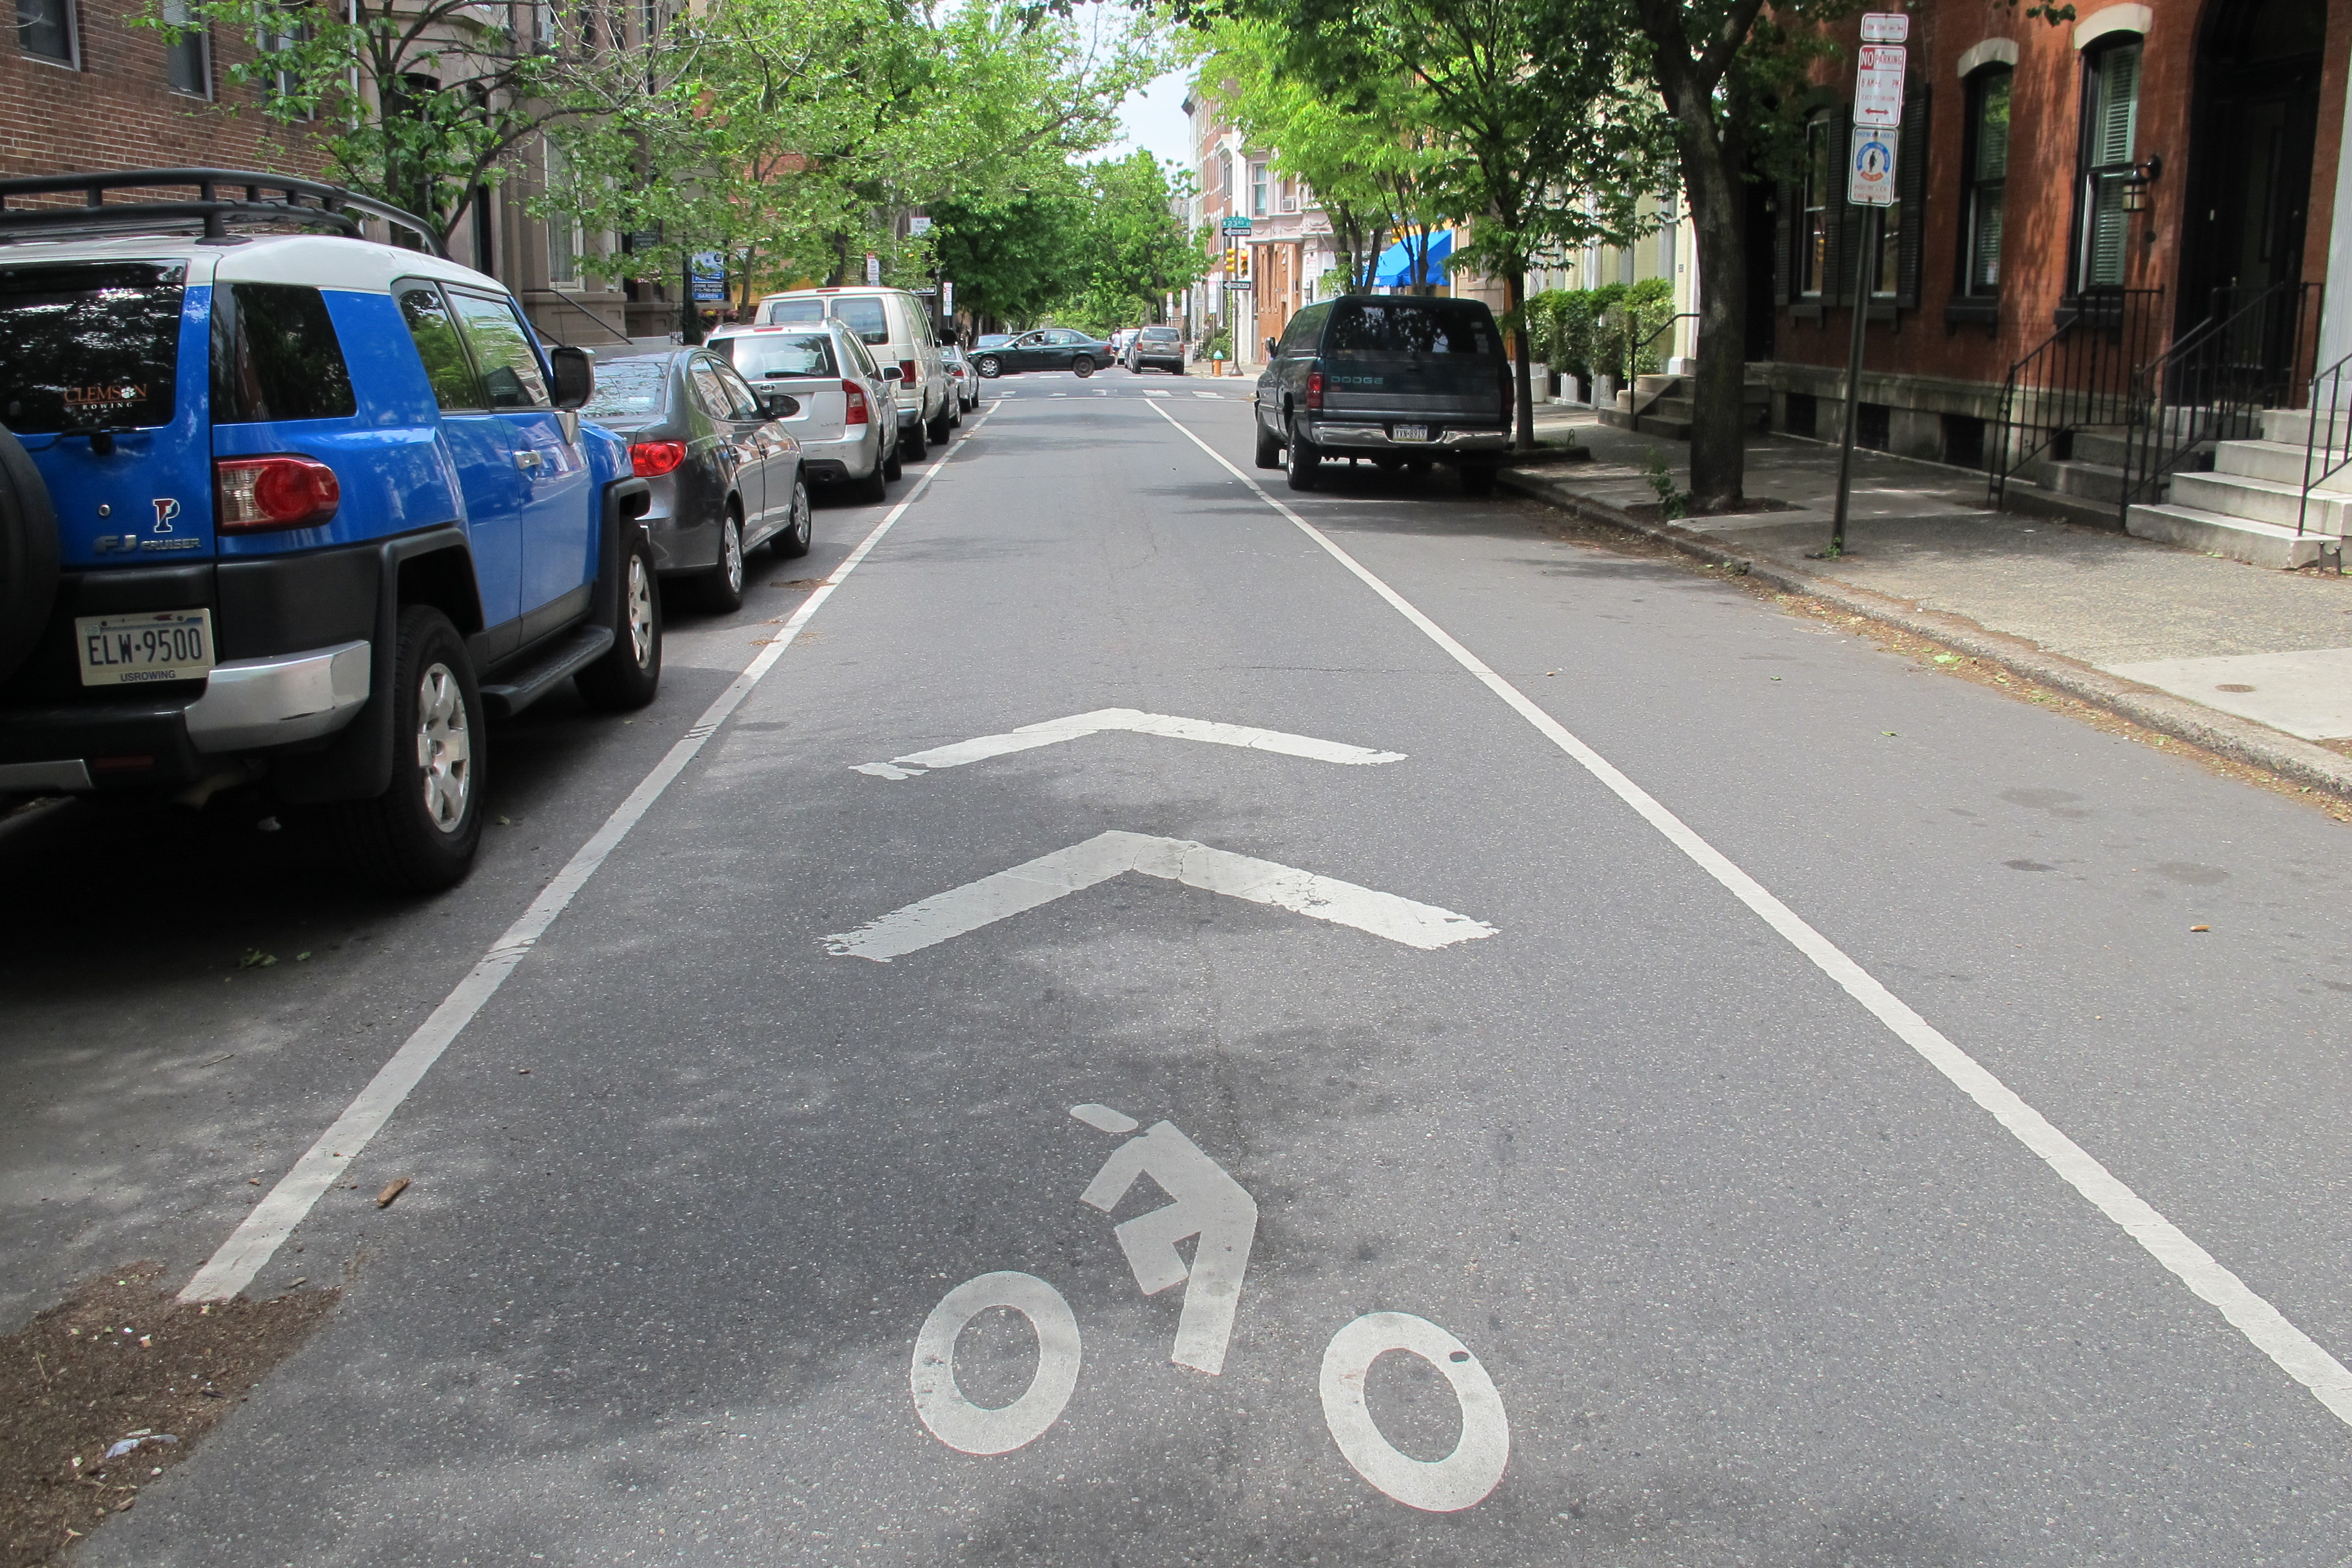 A sharrow on Spruce Street indicates that bikes and cars must share the lane.